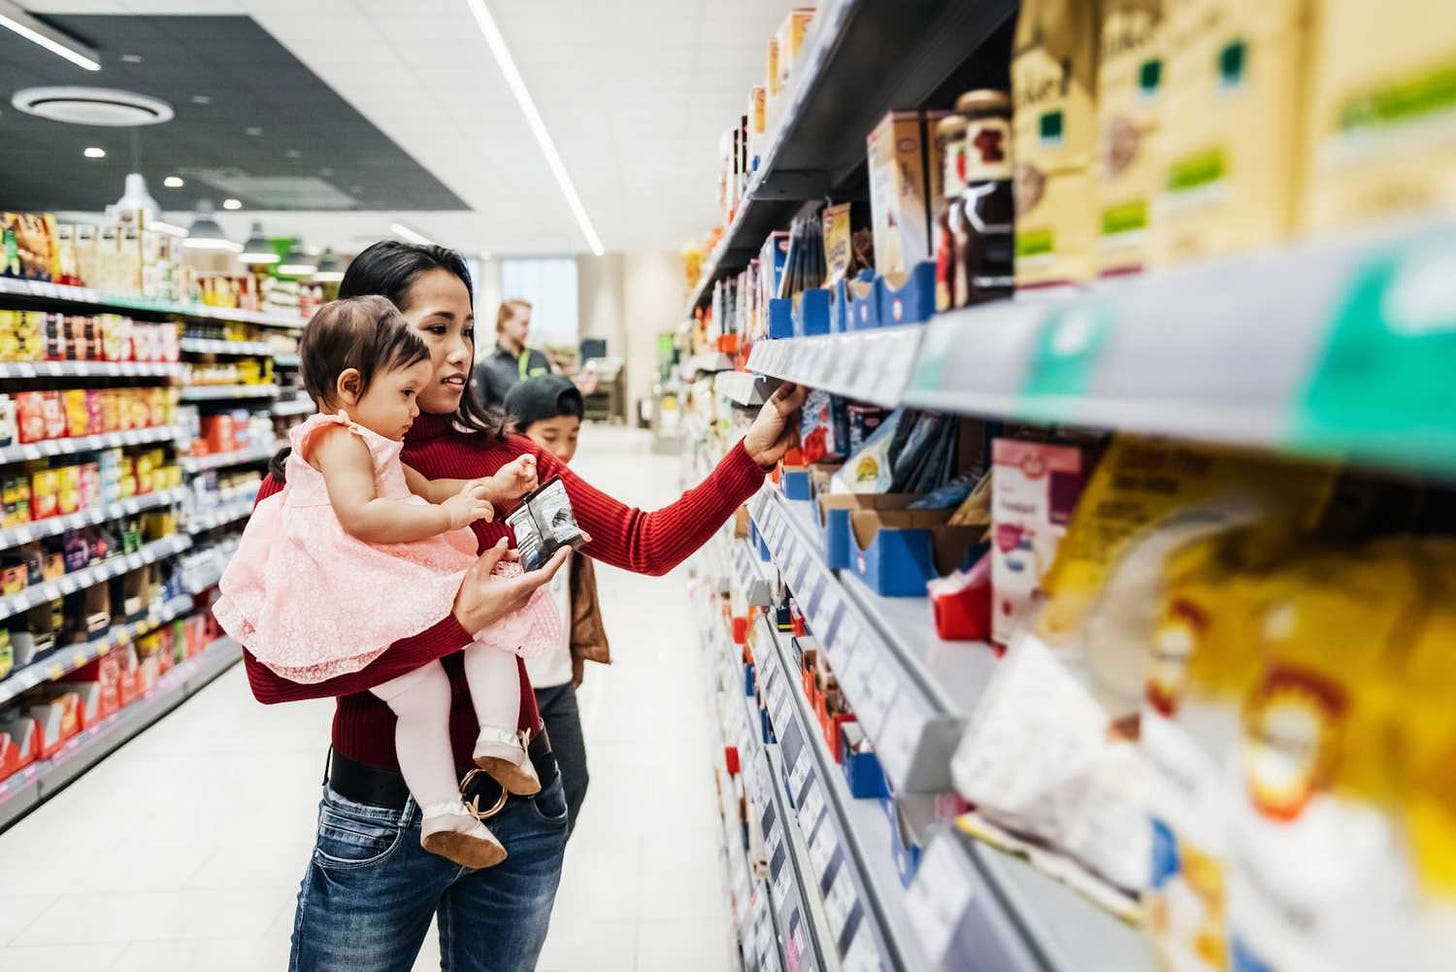 10 Tips for Grocery Shopping for a Large Family